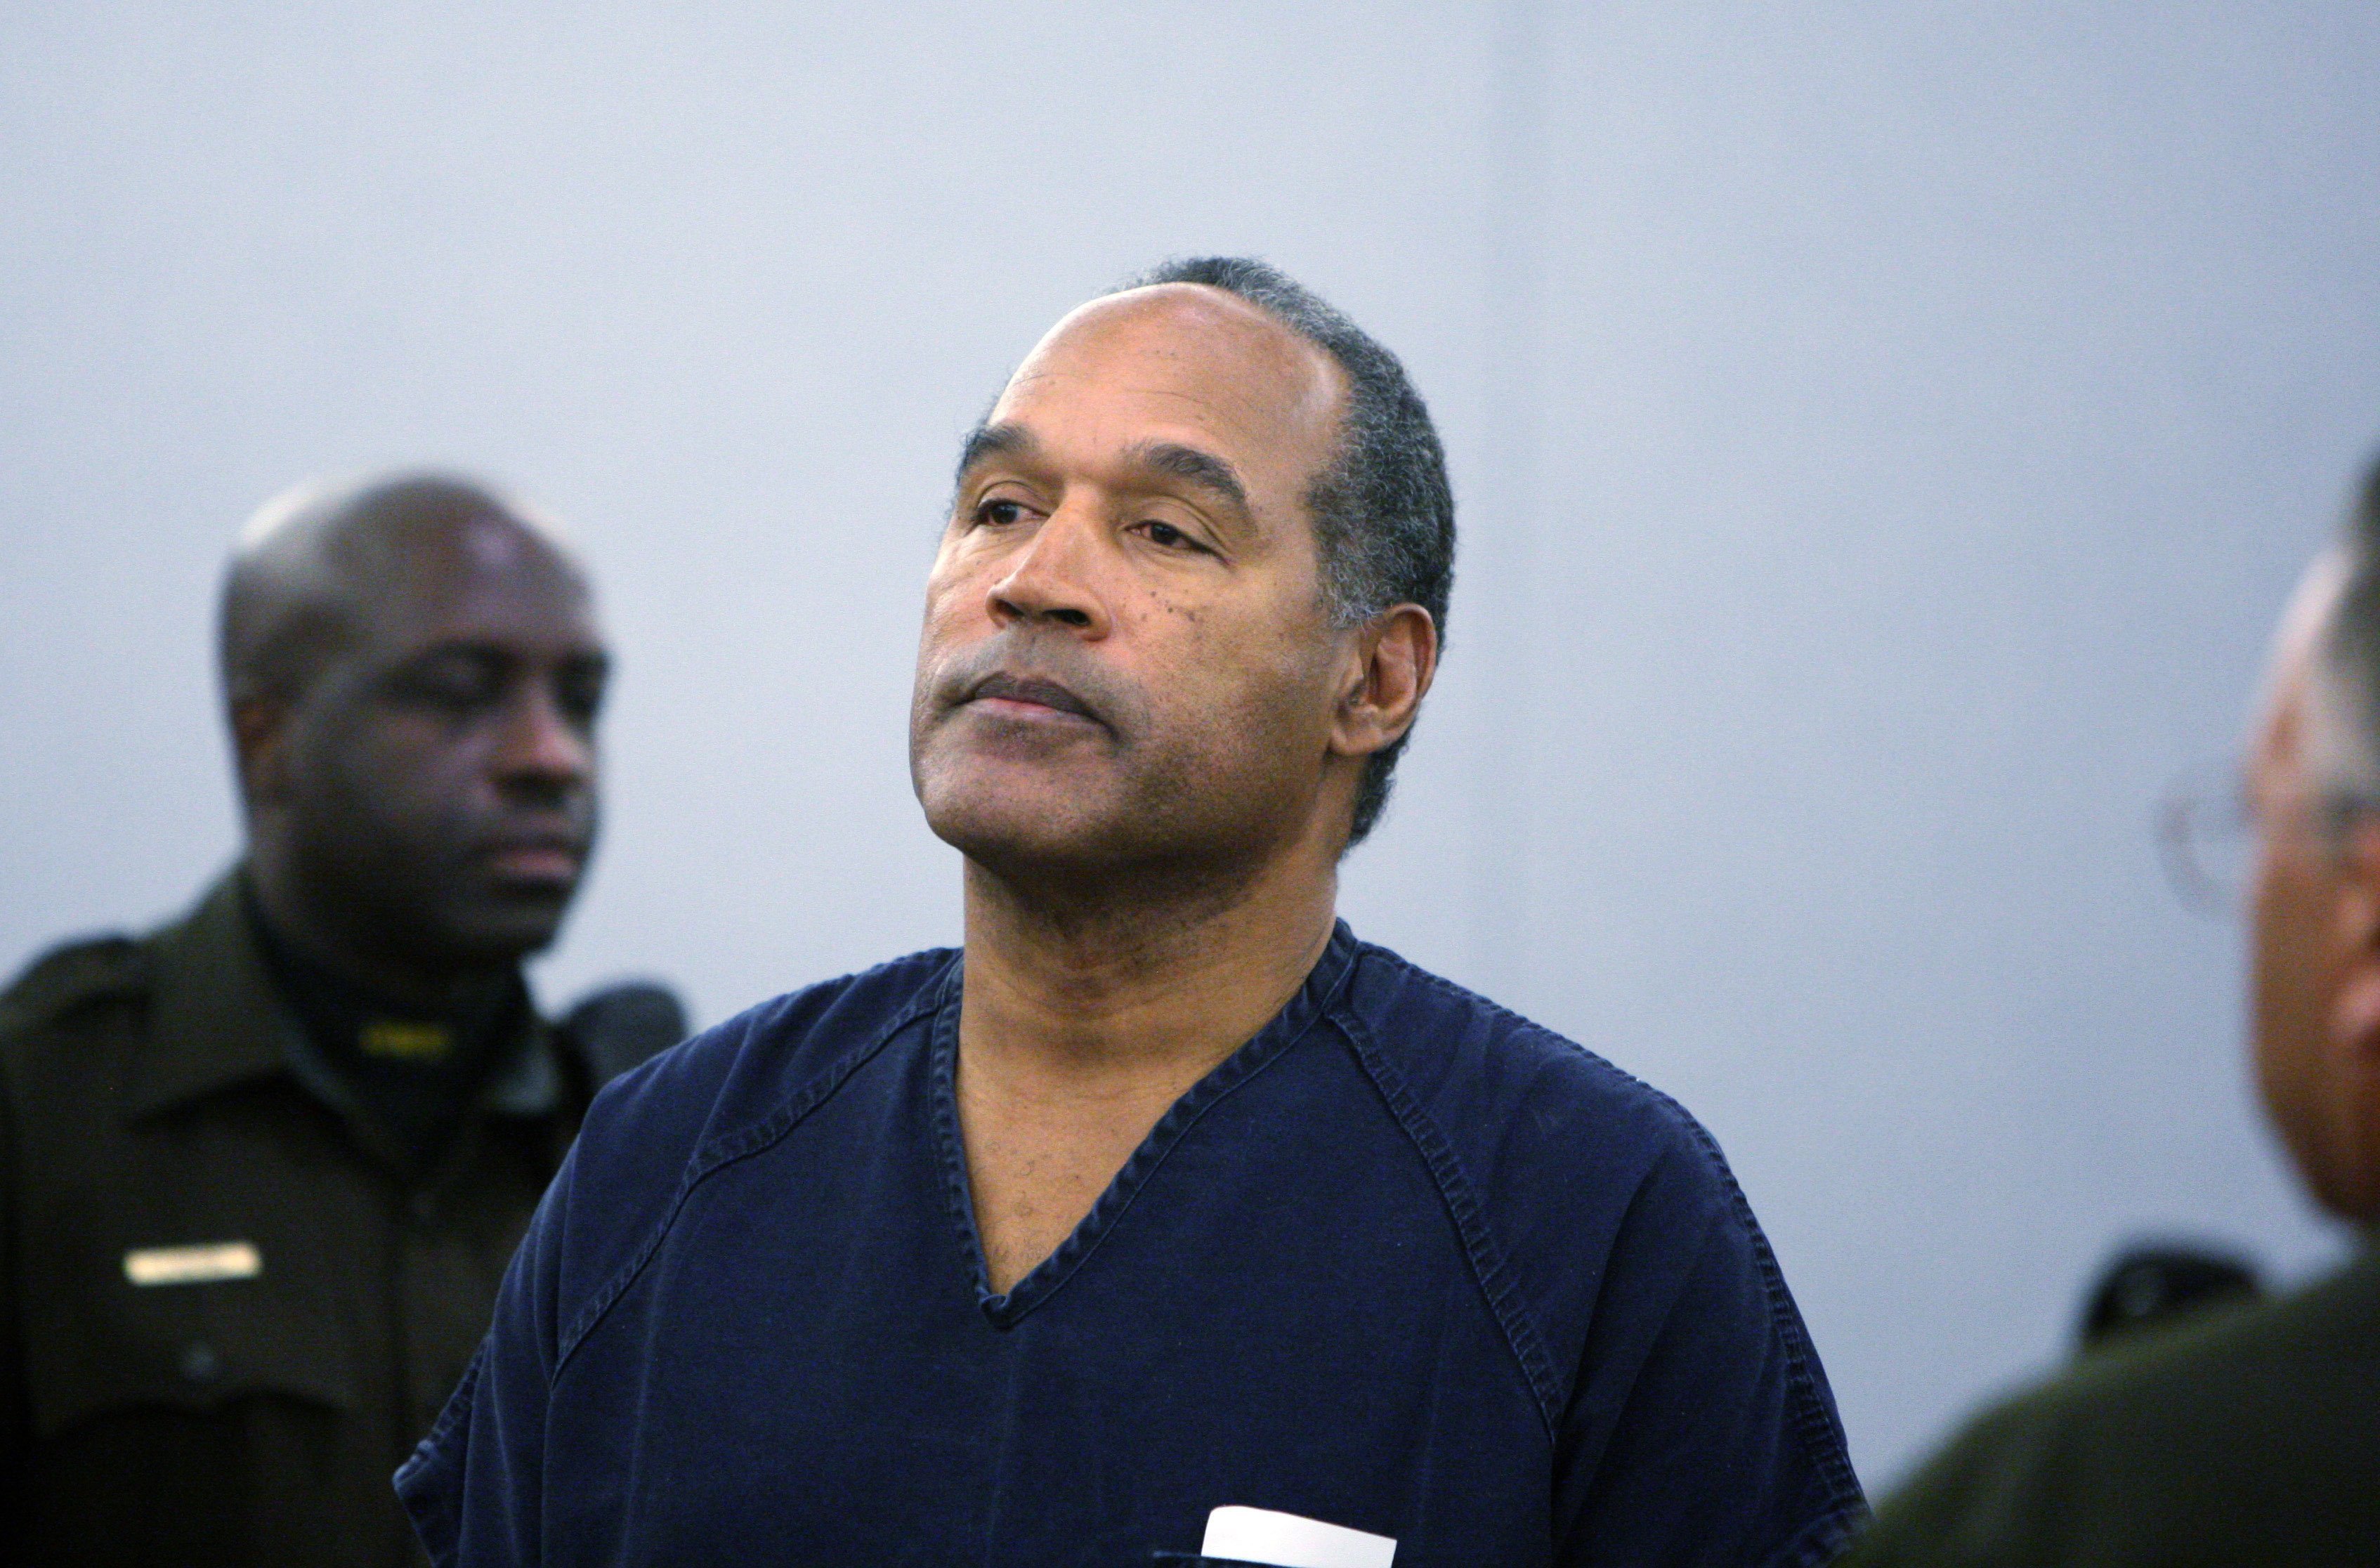 O.J. Simpson at the Clark County Regional Justice Center in Las Vegas, Nevada on Dec. 5, 2008. | Photo: Getty Images